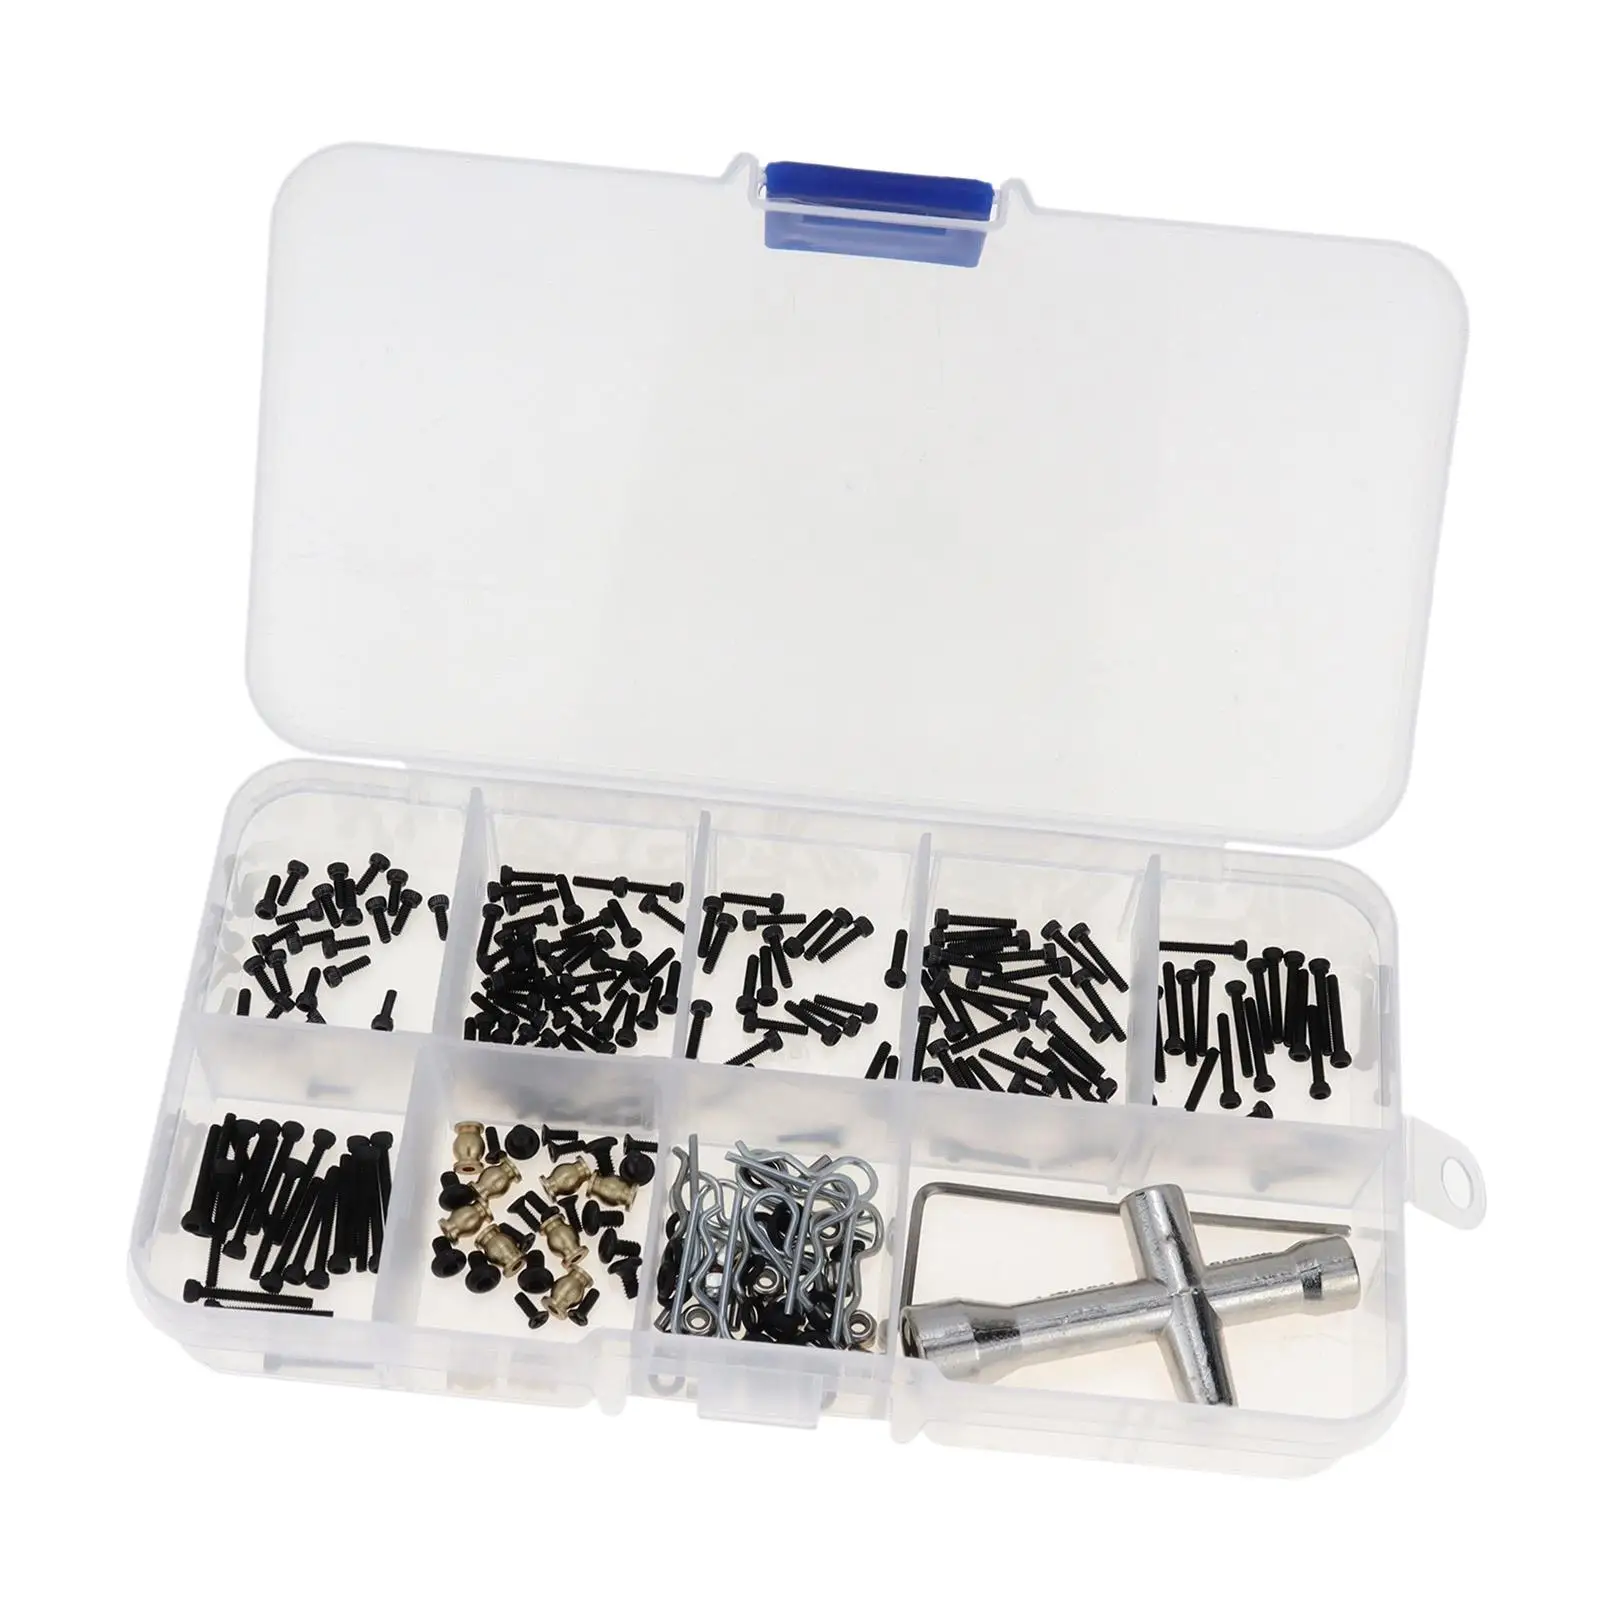 252 Pieces M1.4 Screws Kit Replacements for Axial SCX24 Axi00006 Trucks